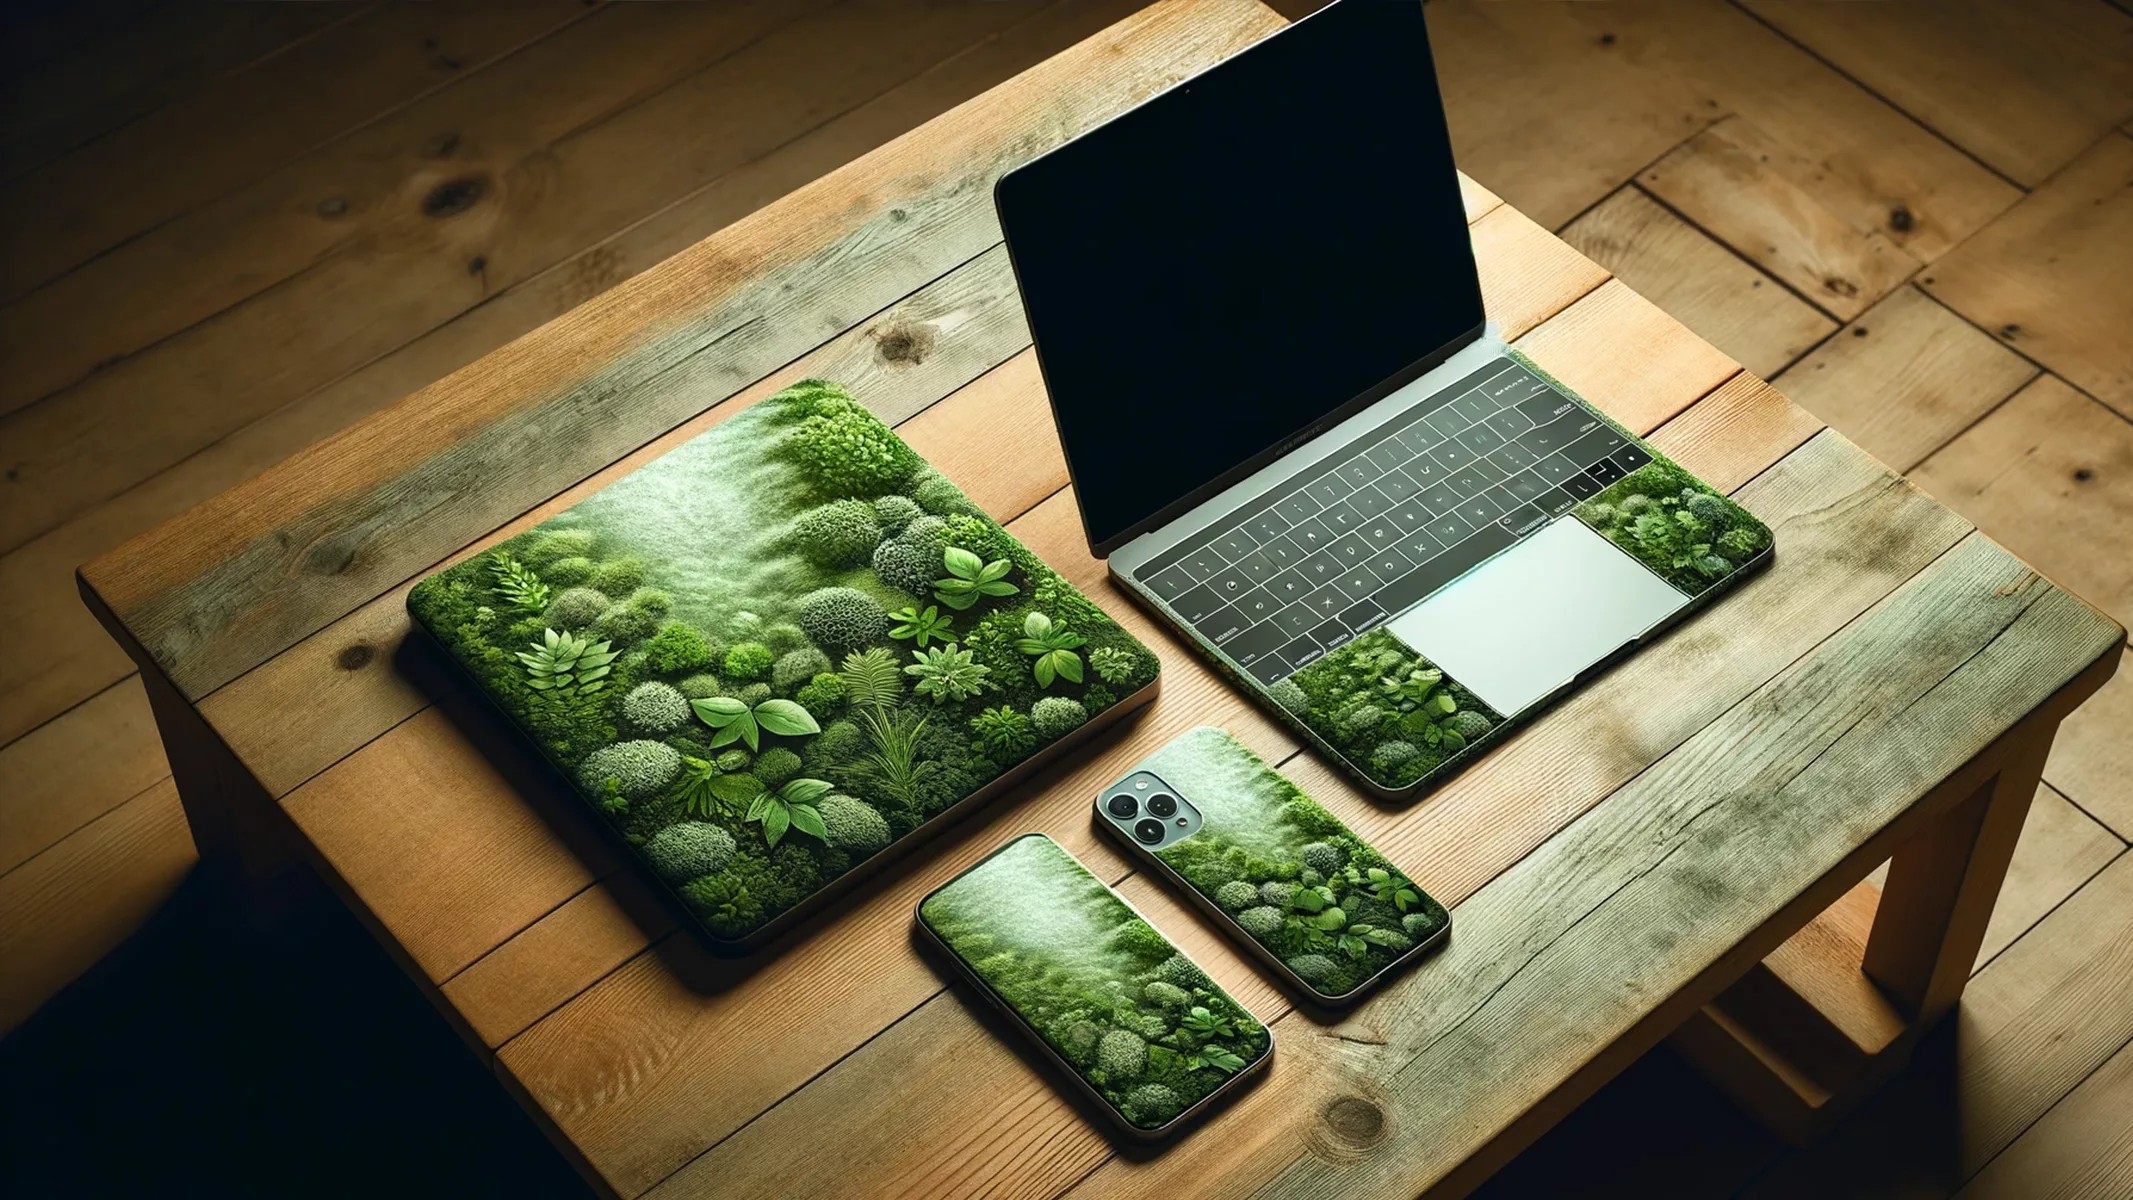 A smartphone and a laptop placed side by side on a wooden table. Both the smartphone and the laptop have a unique texture that resembles greenery sustainability